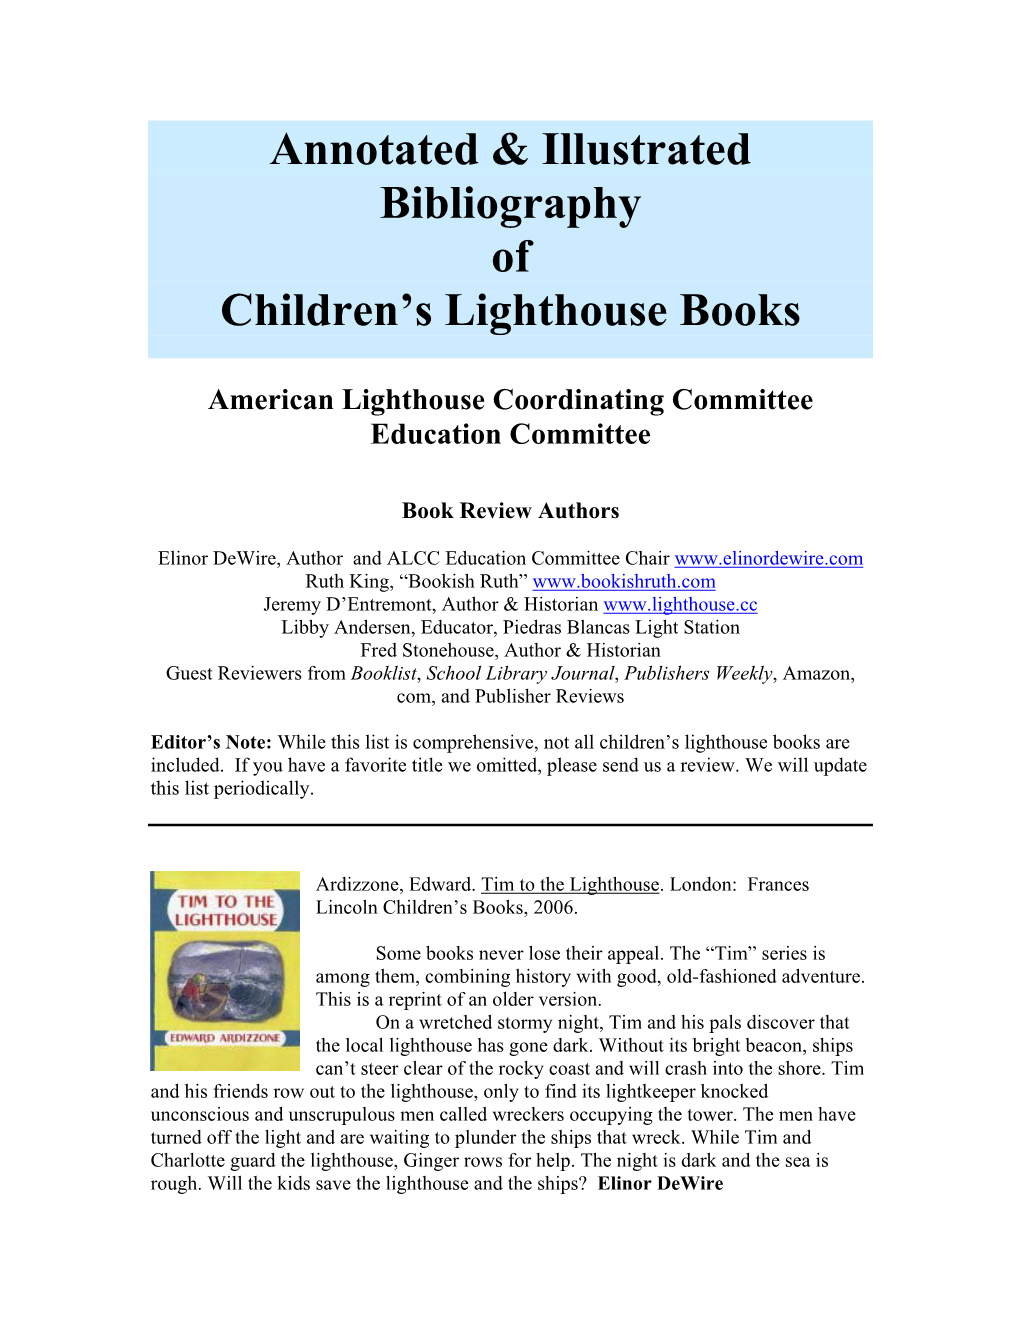 Annotated & Illustrated Bibliography of Children's Lighthouse Books